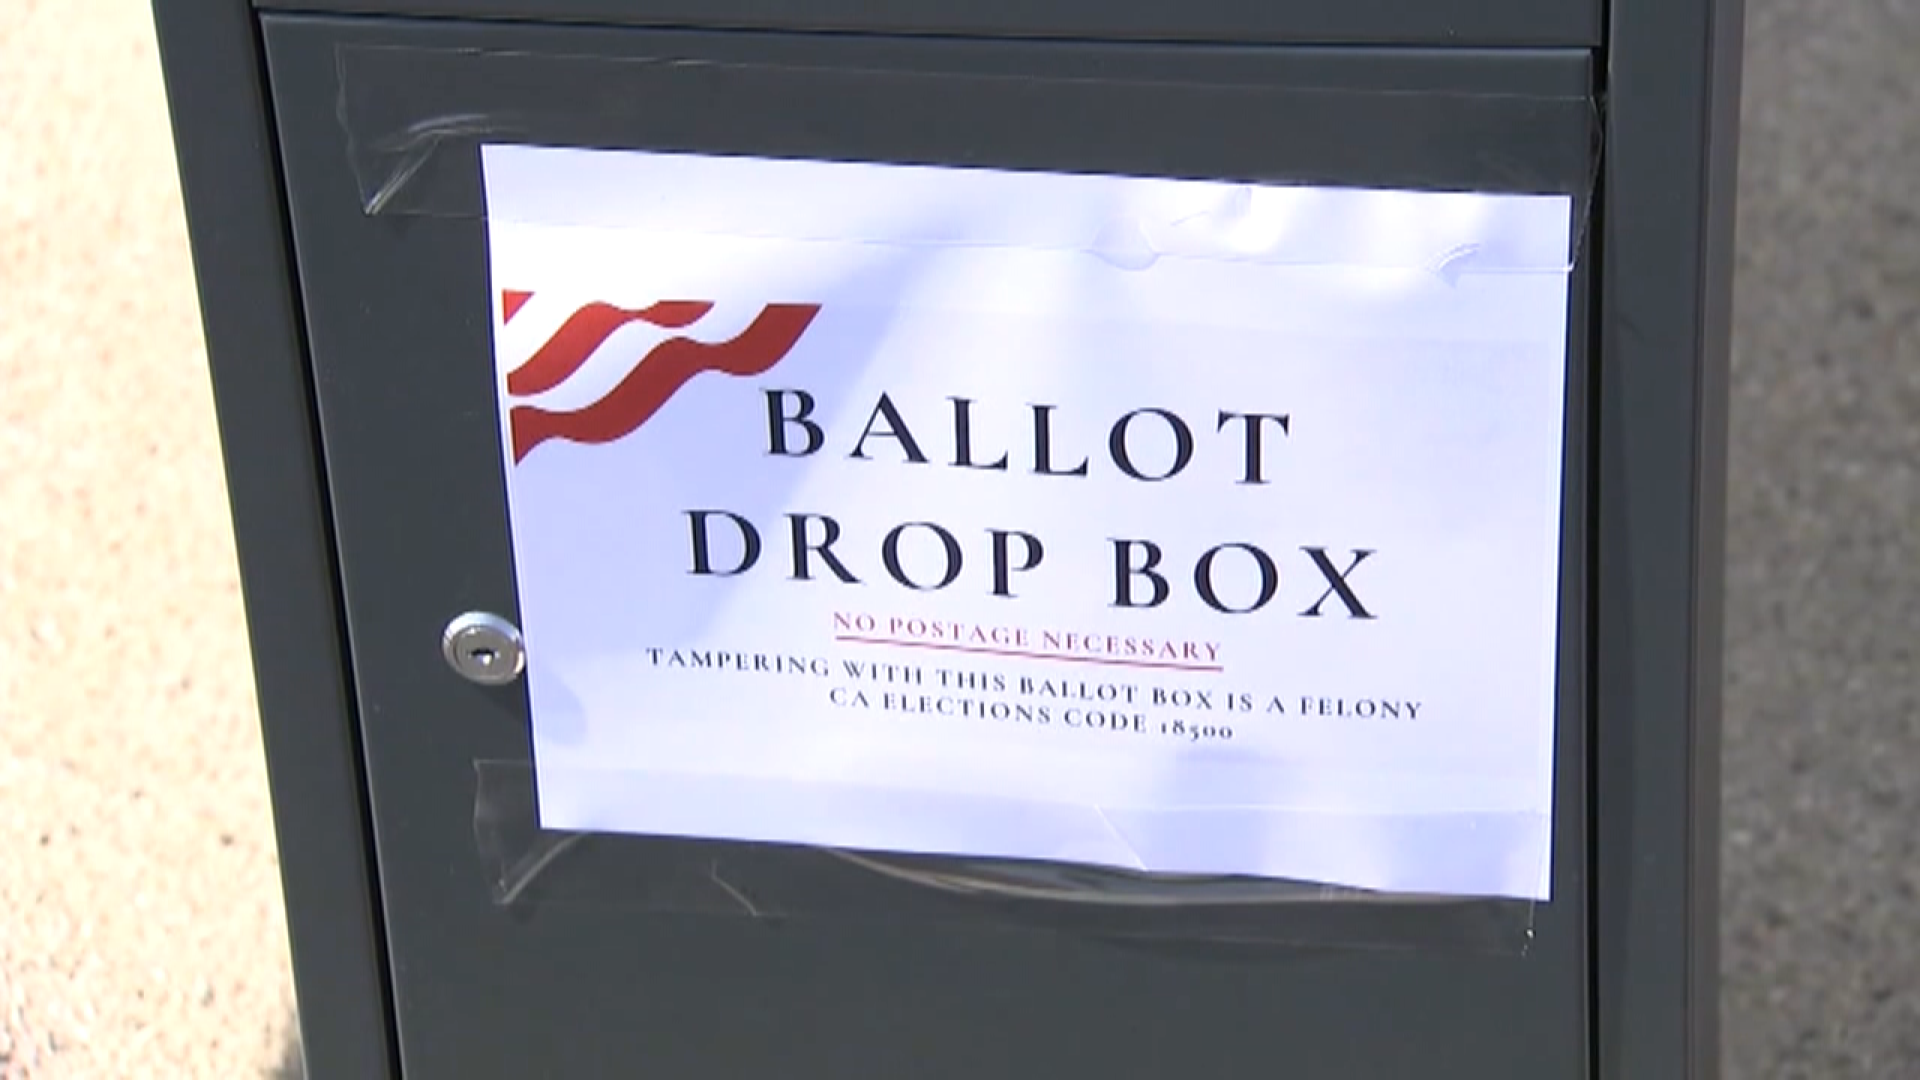 Lawyers say the Secretary of State mischaracterized how the boxes were being used, and that the party intends to continue legally collecting vote by mail ballots.